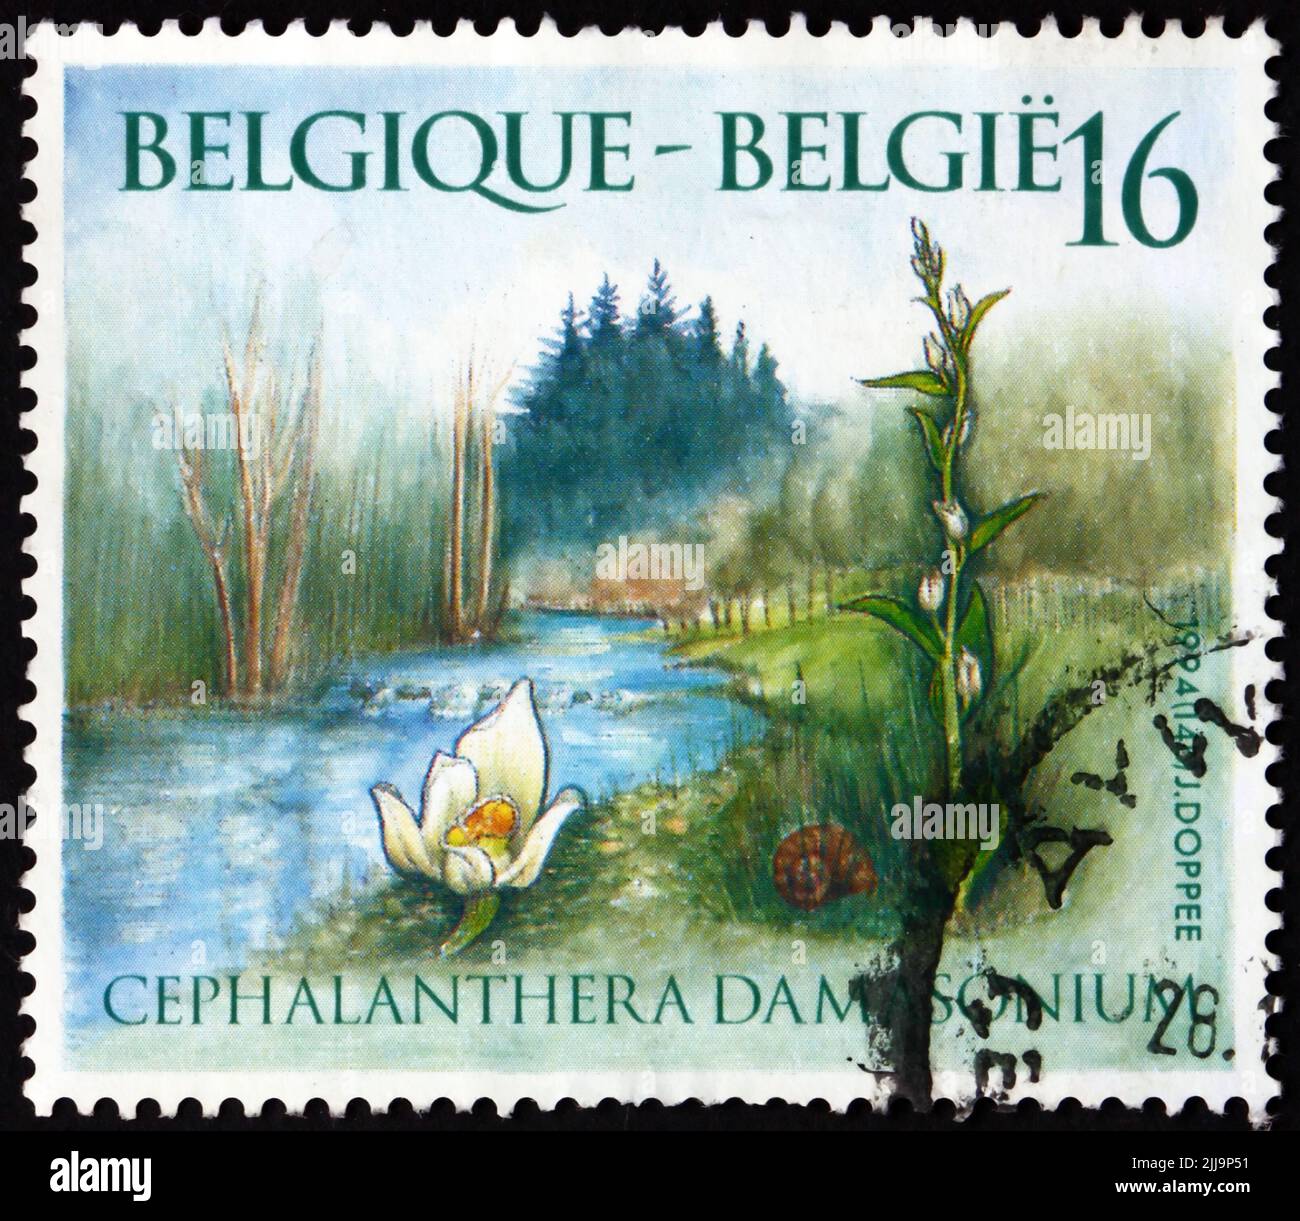 BELGIUM - CIRCA 1994: a stamp printed in Belgium shows white helleborine, cephalanthera damasonium, is a species of orchid widespread across much of E Stock Photo